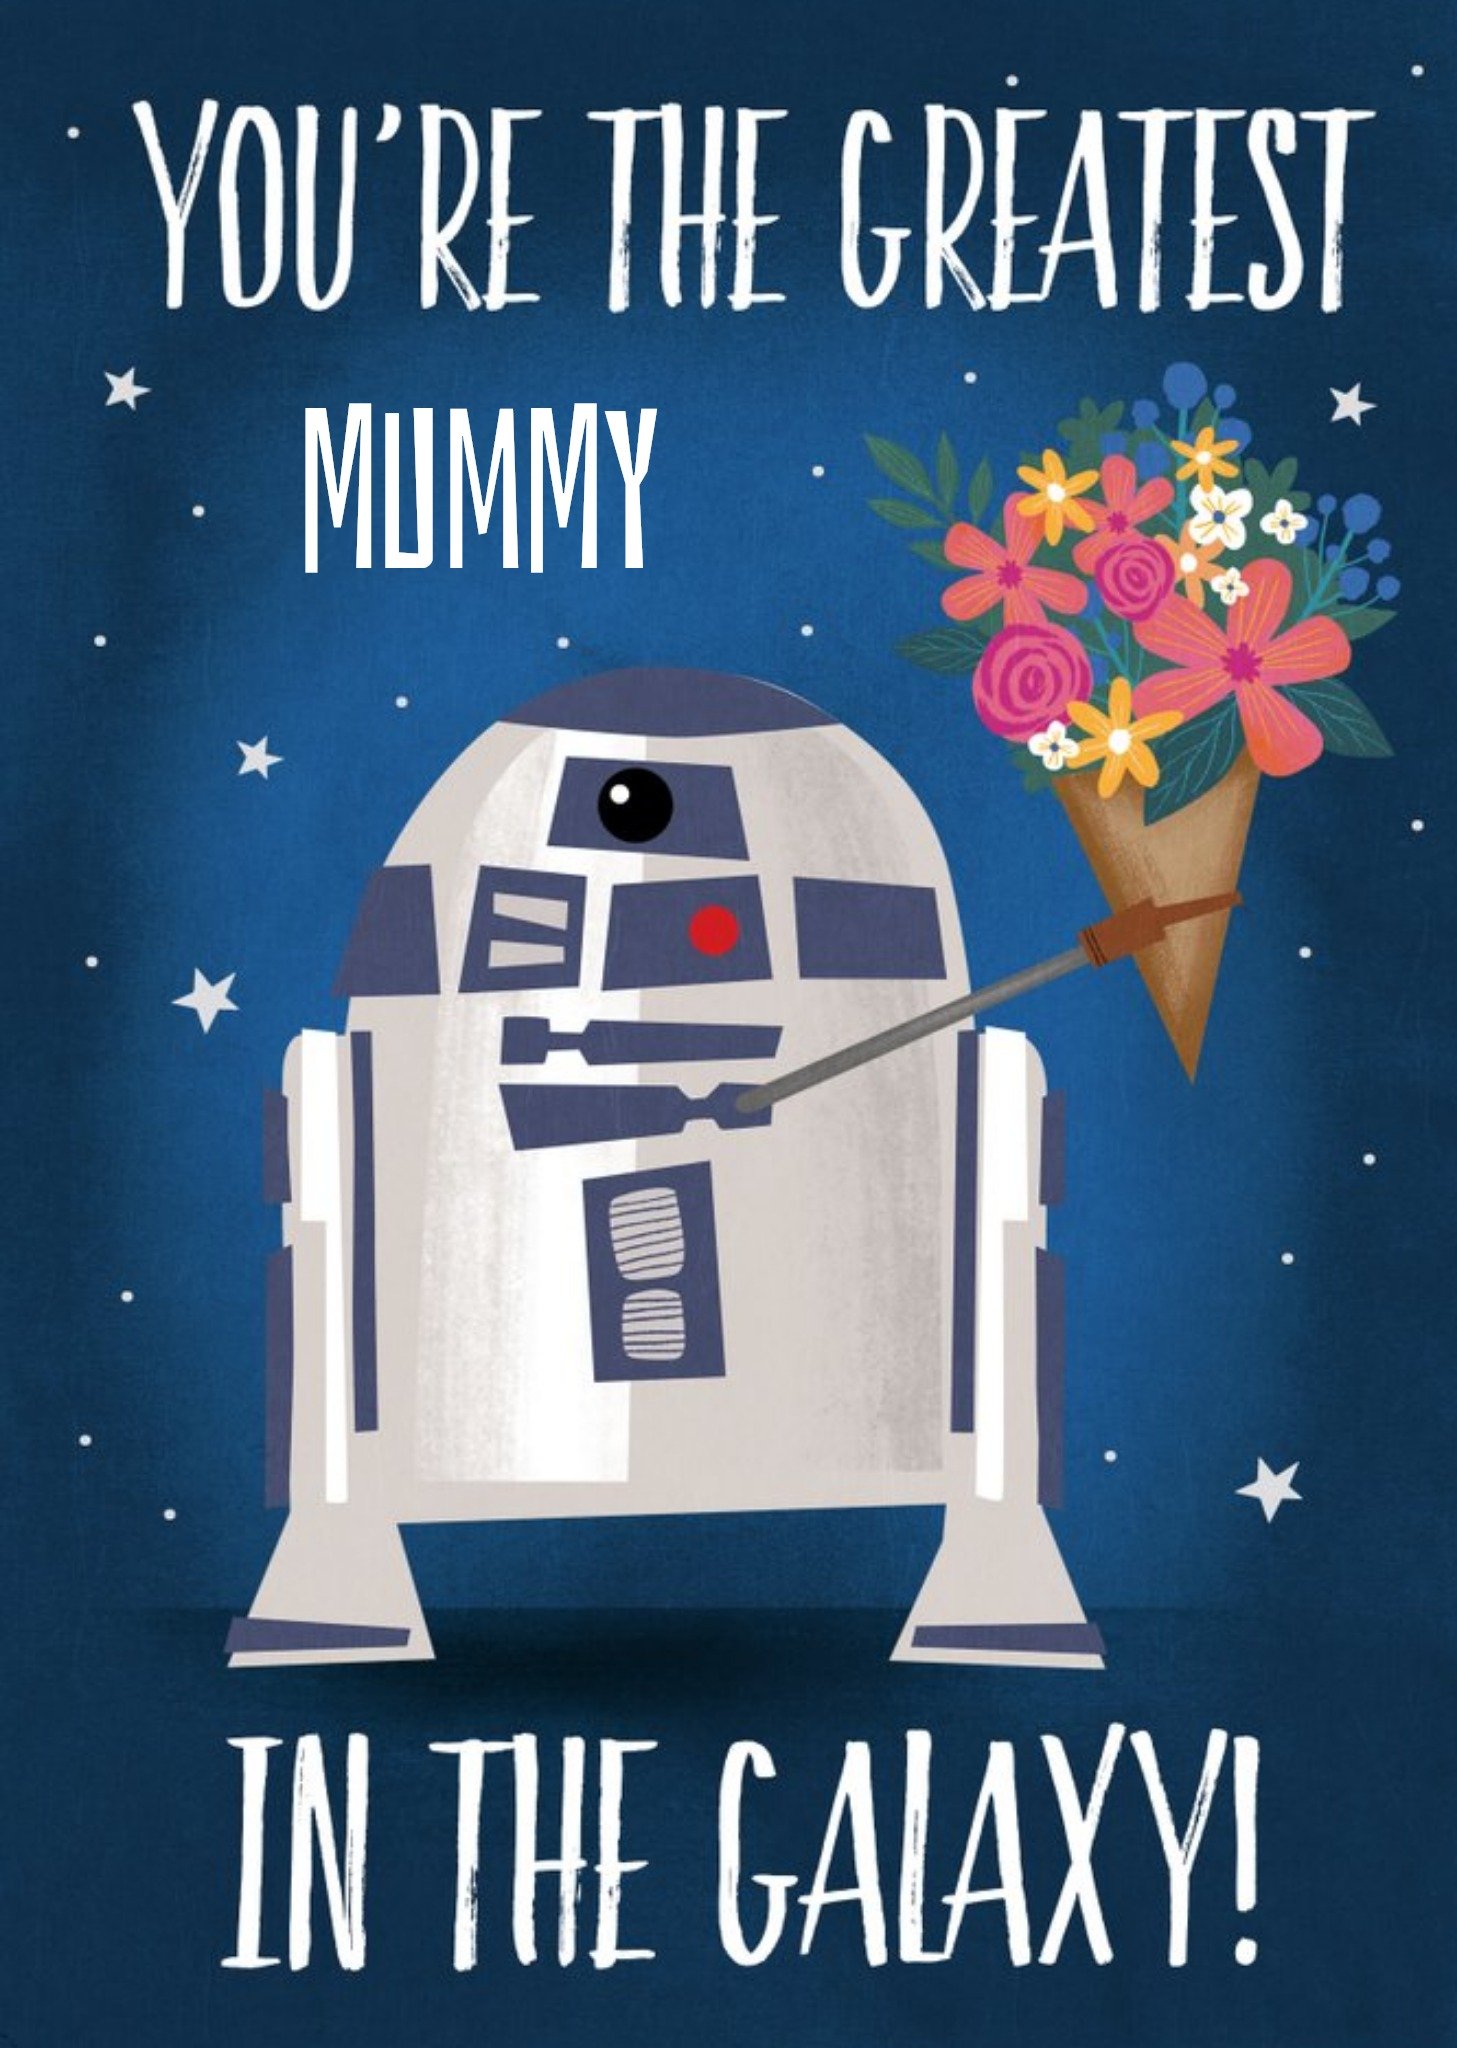 Disney Star Wars You're The Greatest Mummy In The Galaxy Mother's Day Card, Large